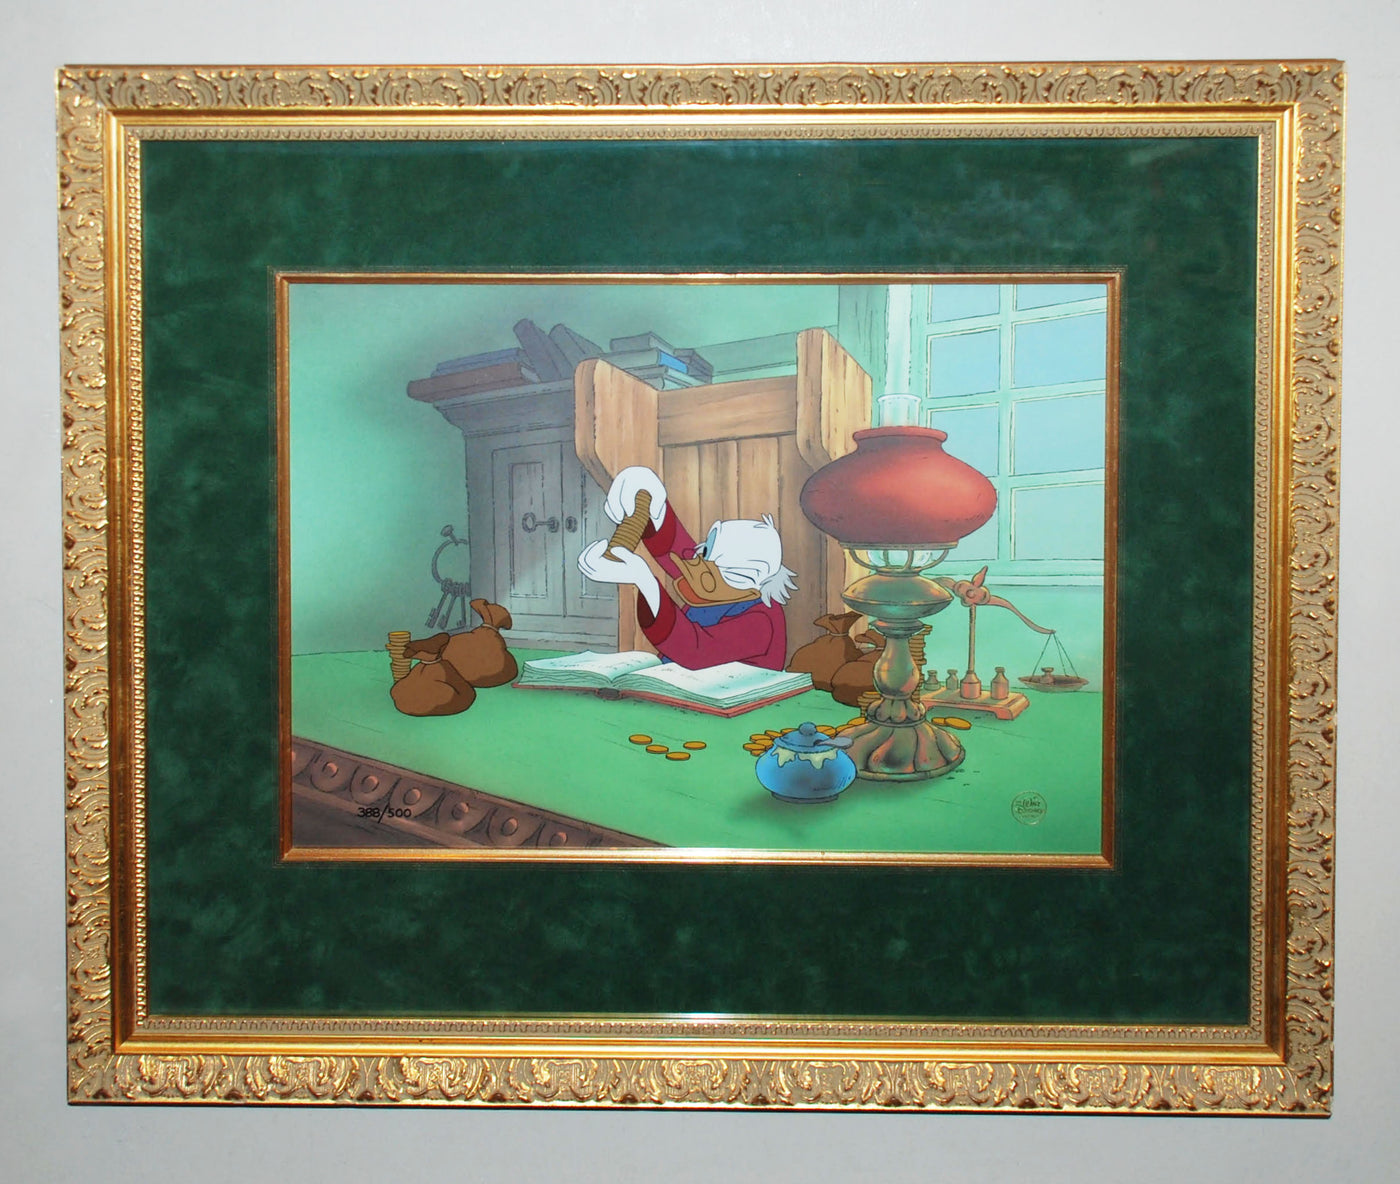 Original Disney Limited Edition cel from Mickey's Christmas Carol featuring Scrooge McDuck